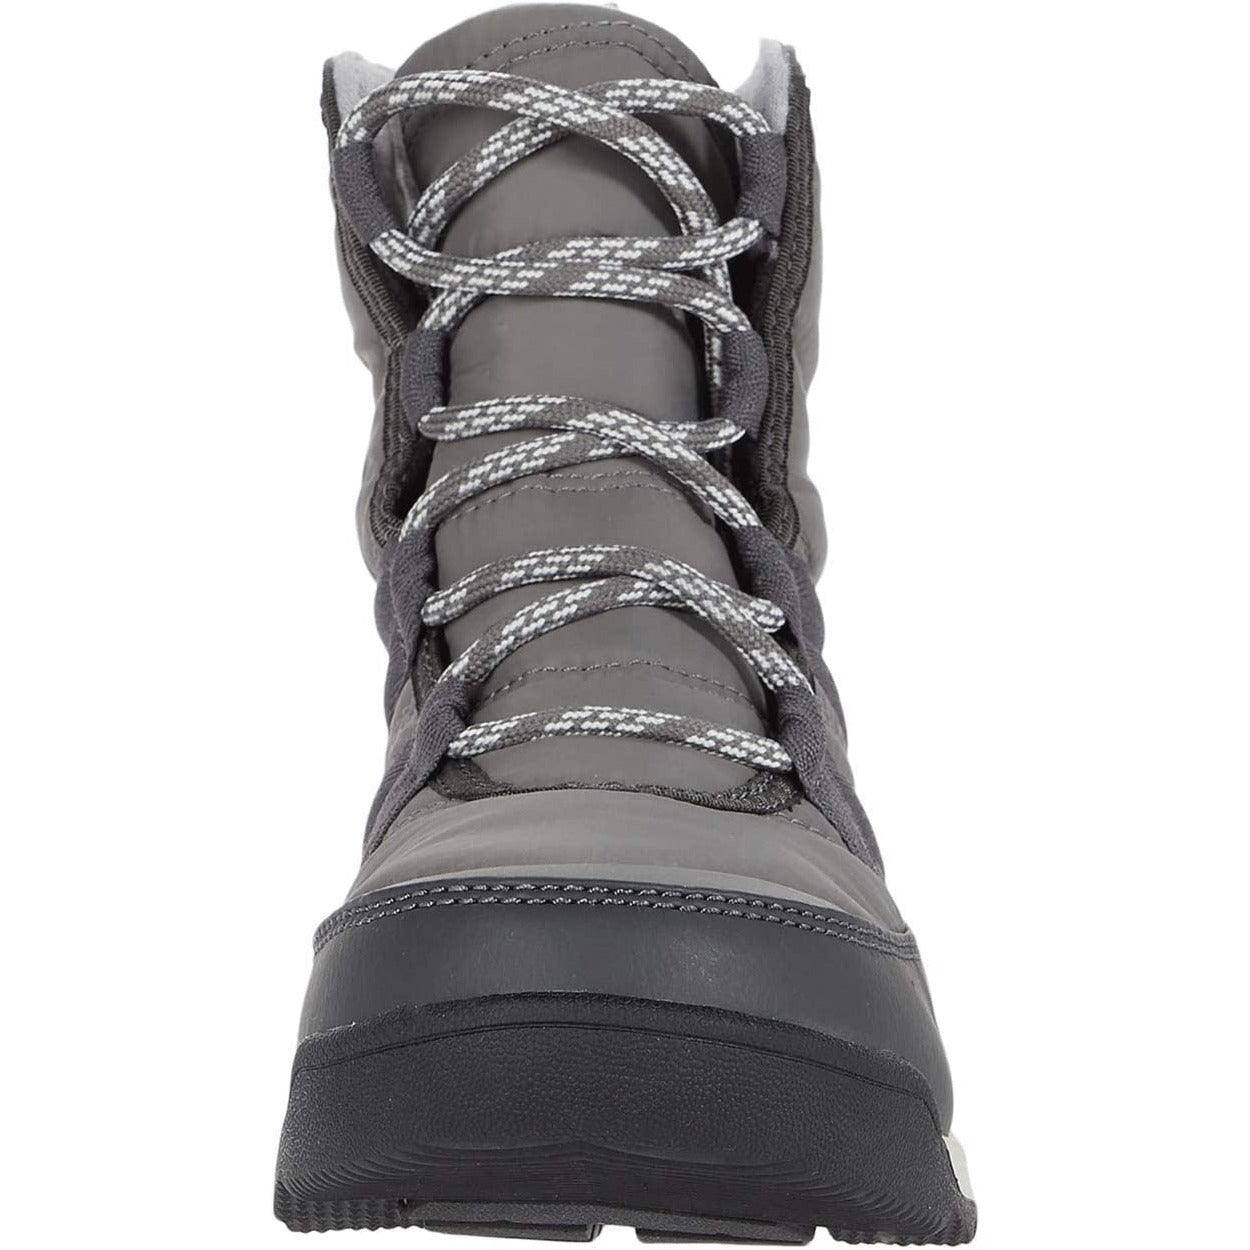 Whitney II Short Lace Waterproof Boot - The Shoe CollectiveSorel